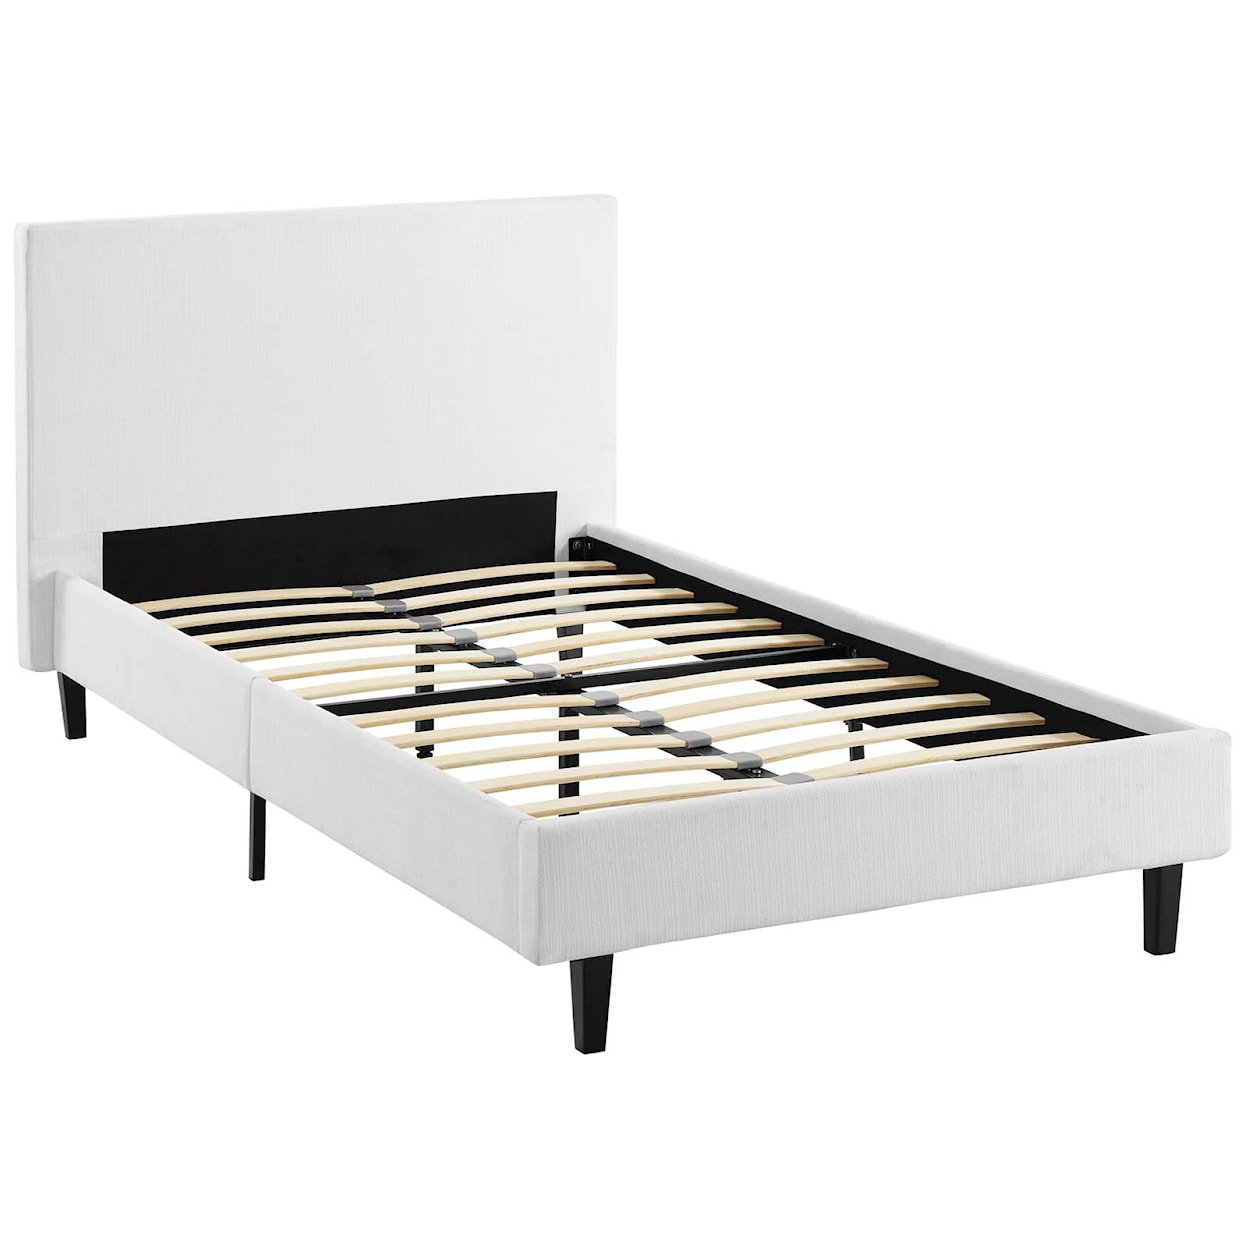 Modway Anya Twin Bed